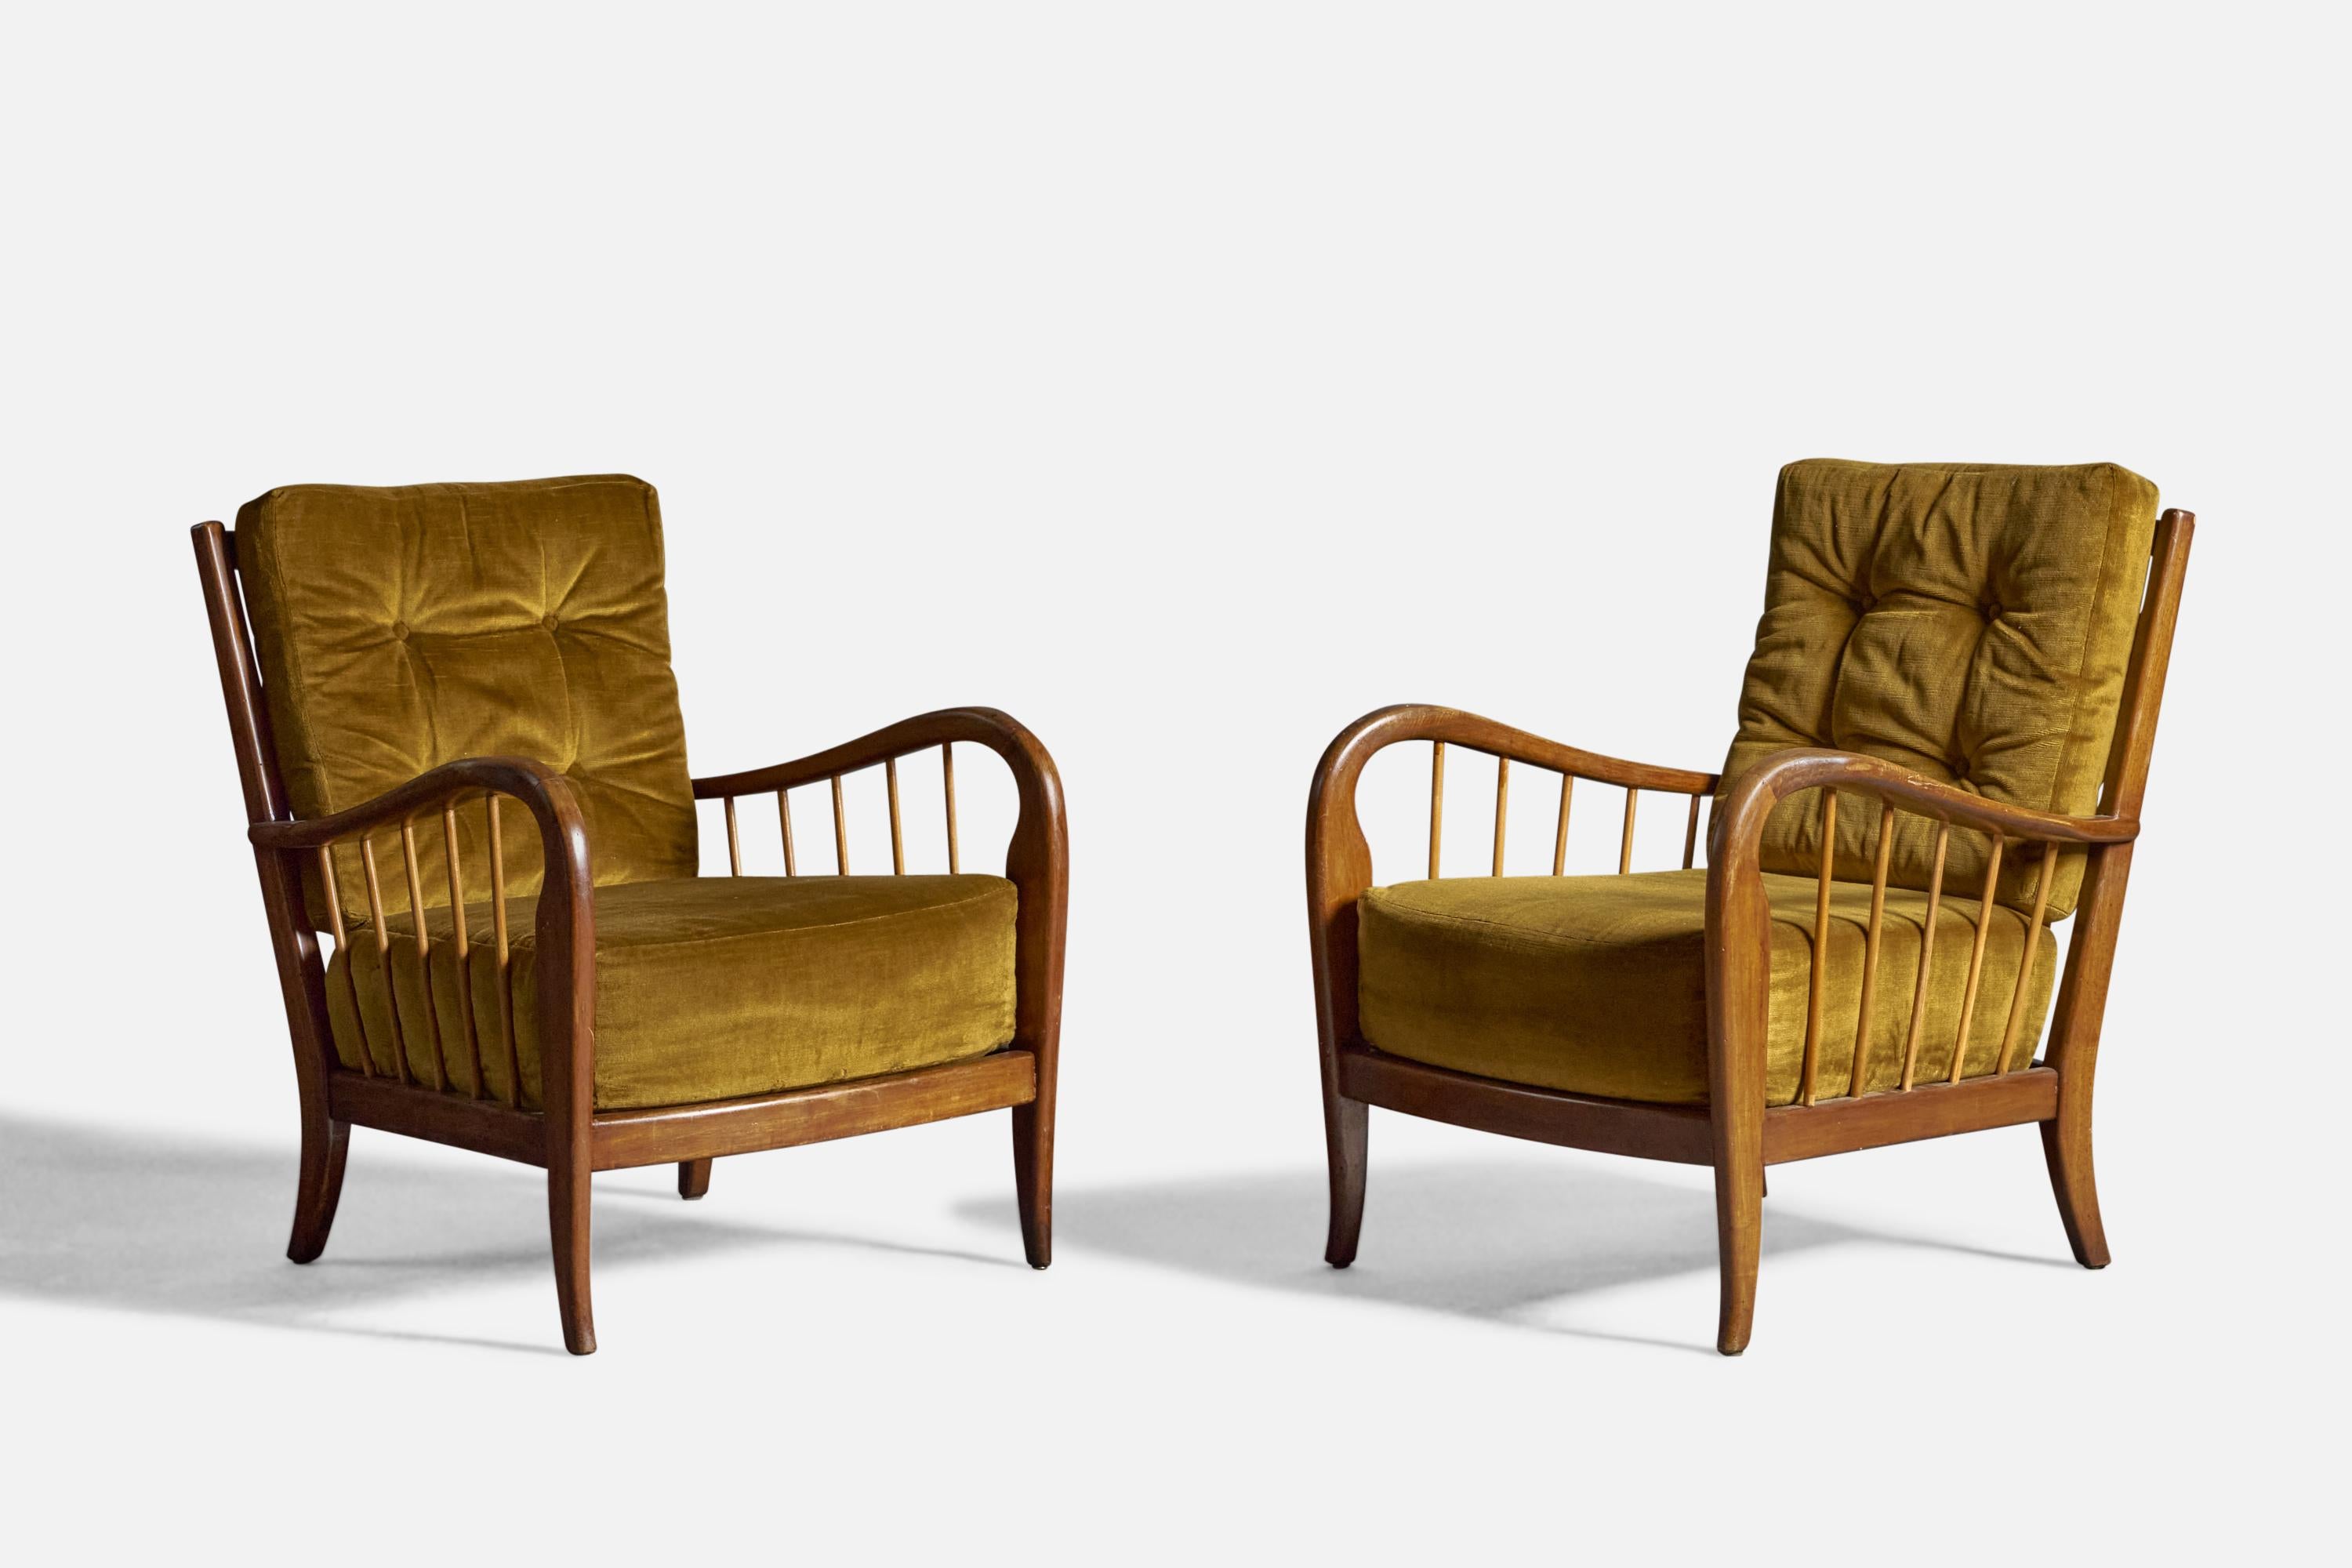 A pair of walnut and green velvet lounge chairs, designed and production attributed to Paolo Buffa, Italy, c. 1940s.
